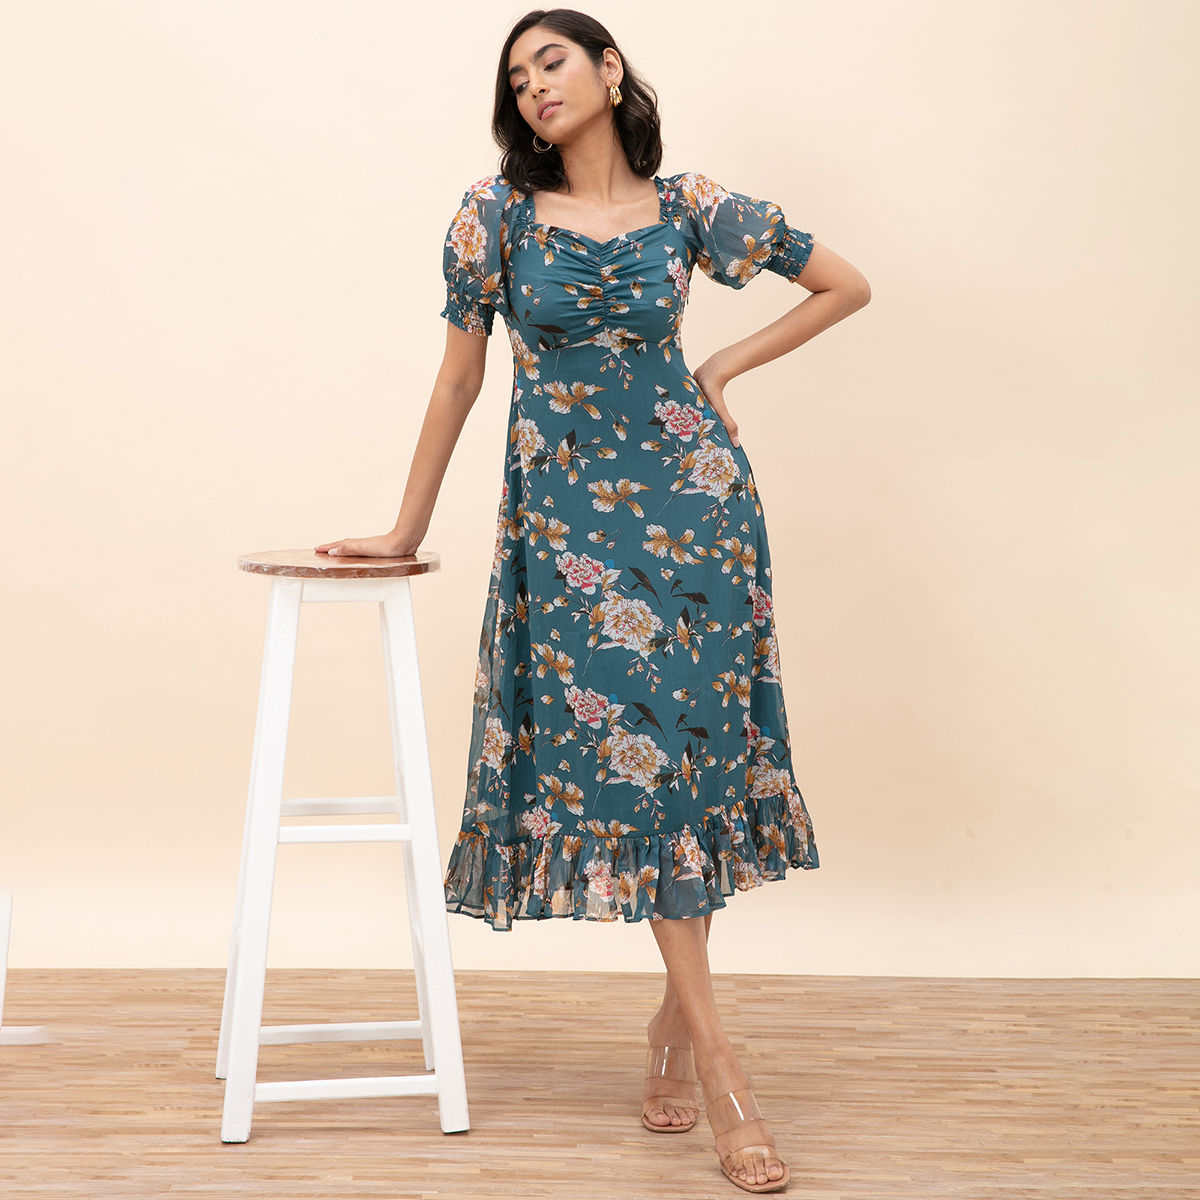 https://images-static.nykaa.com/media/catalog/product/a/d/ad0b0c3dr0928_1.jpg